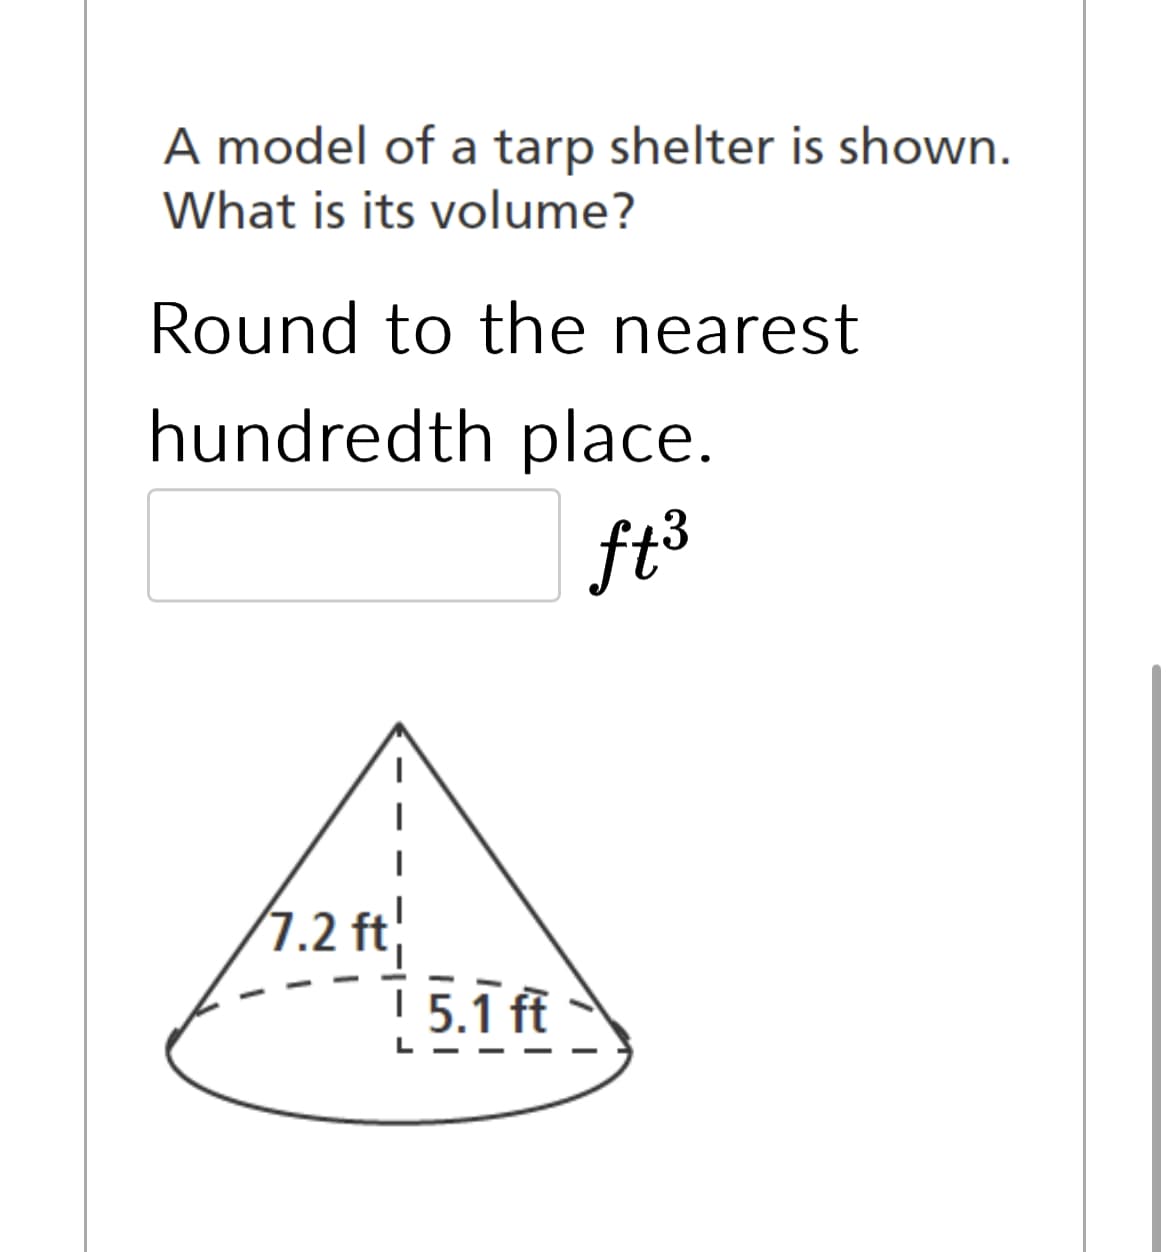 A model of a tarp shelter is shown.
What is its volume?
Round to the nearest
hundredth place.
ft ³
7.2 ft
15.1 ft